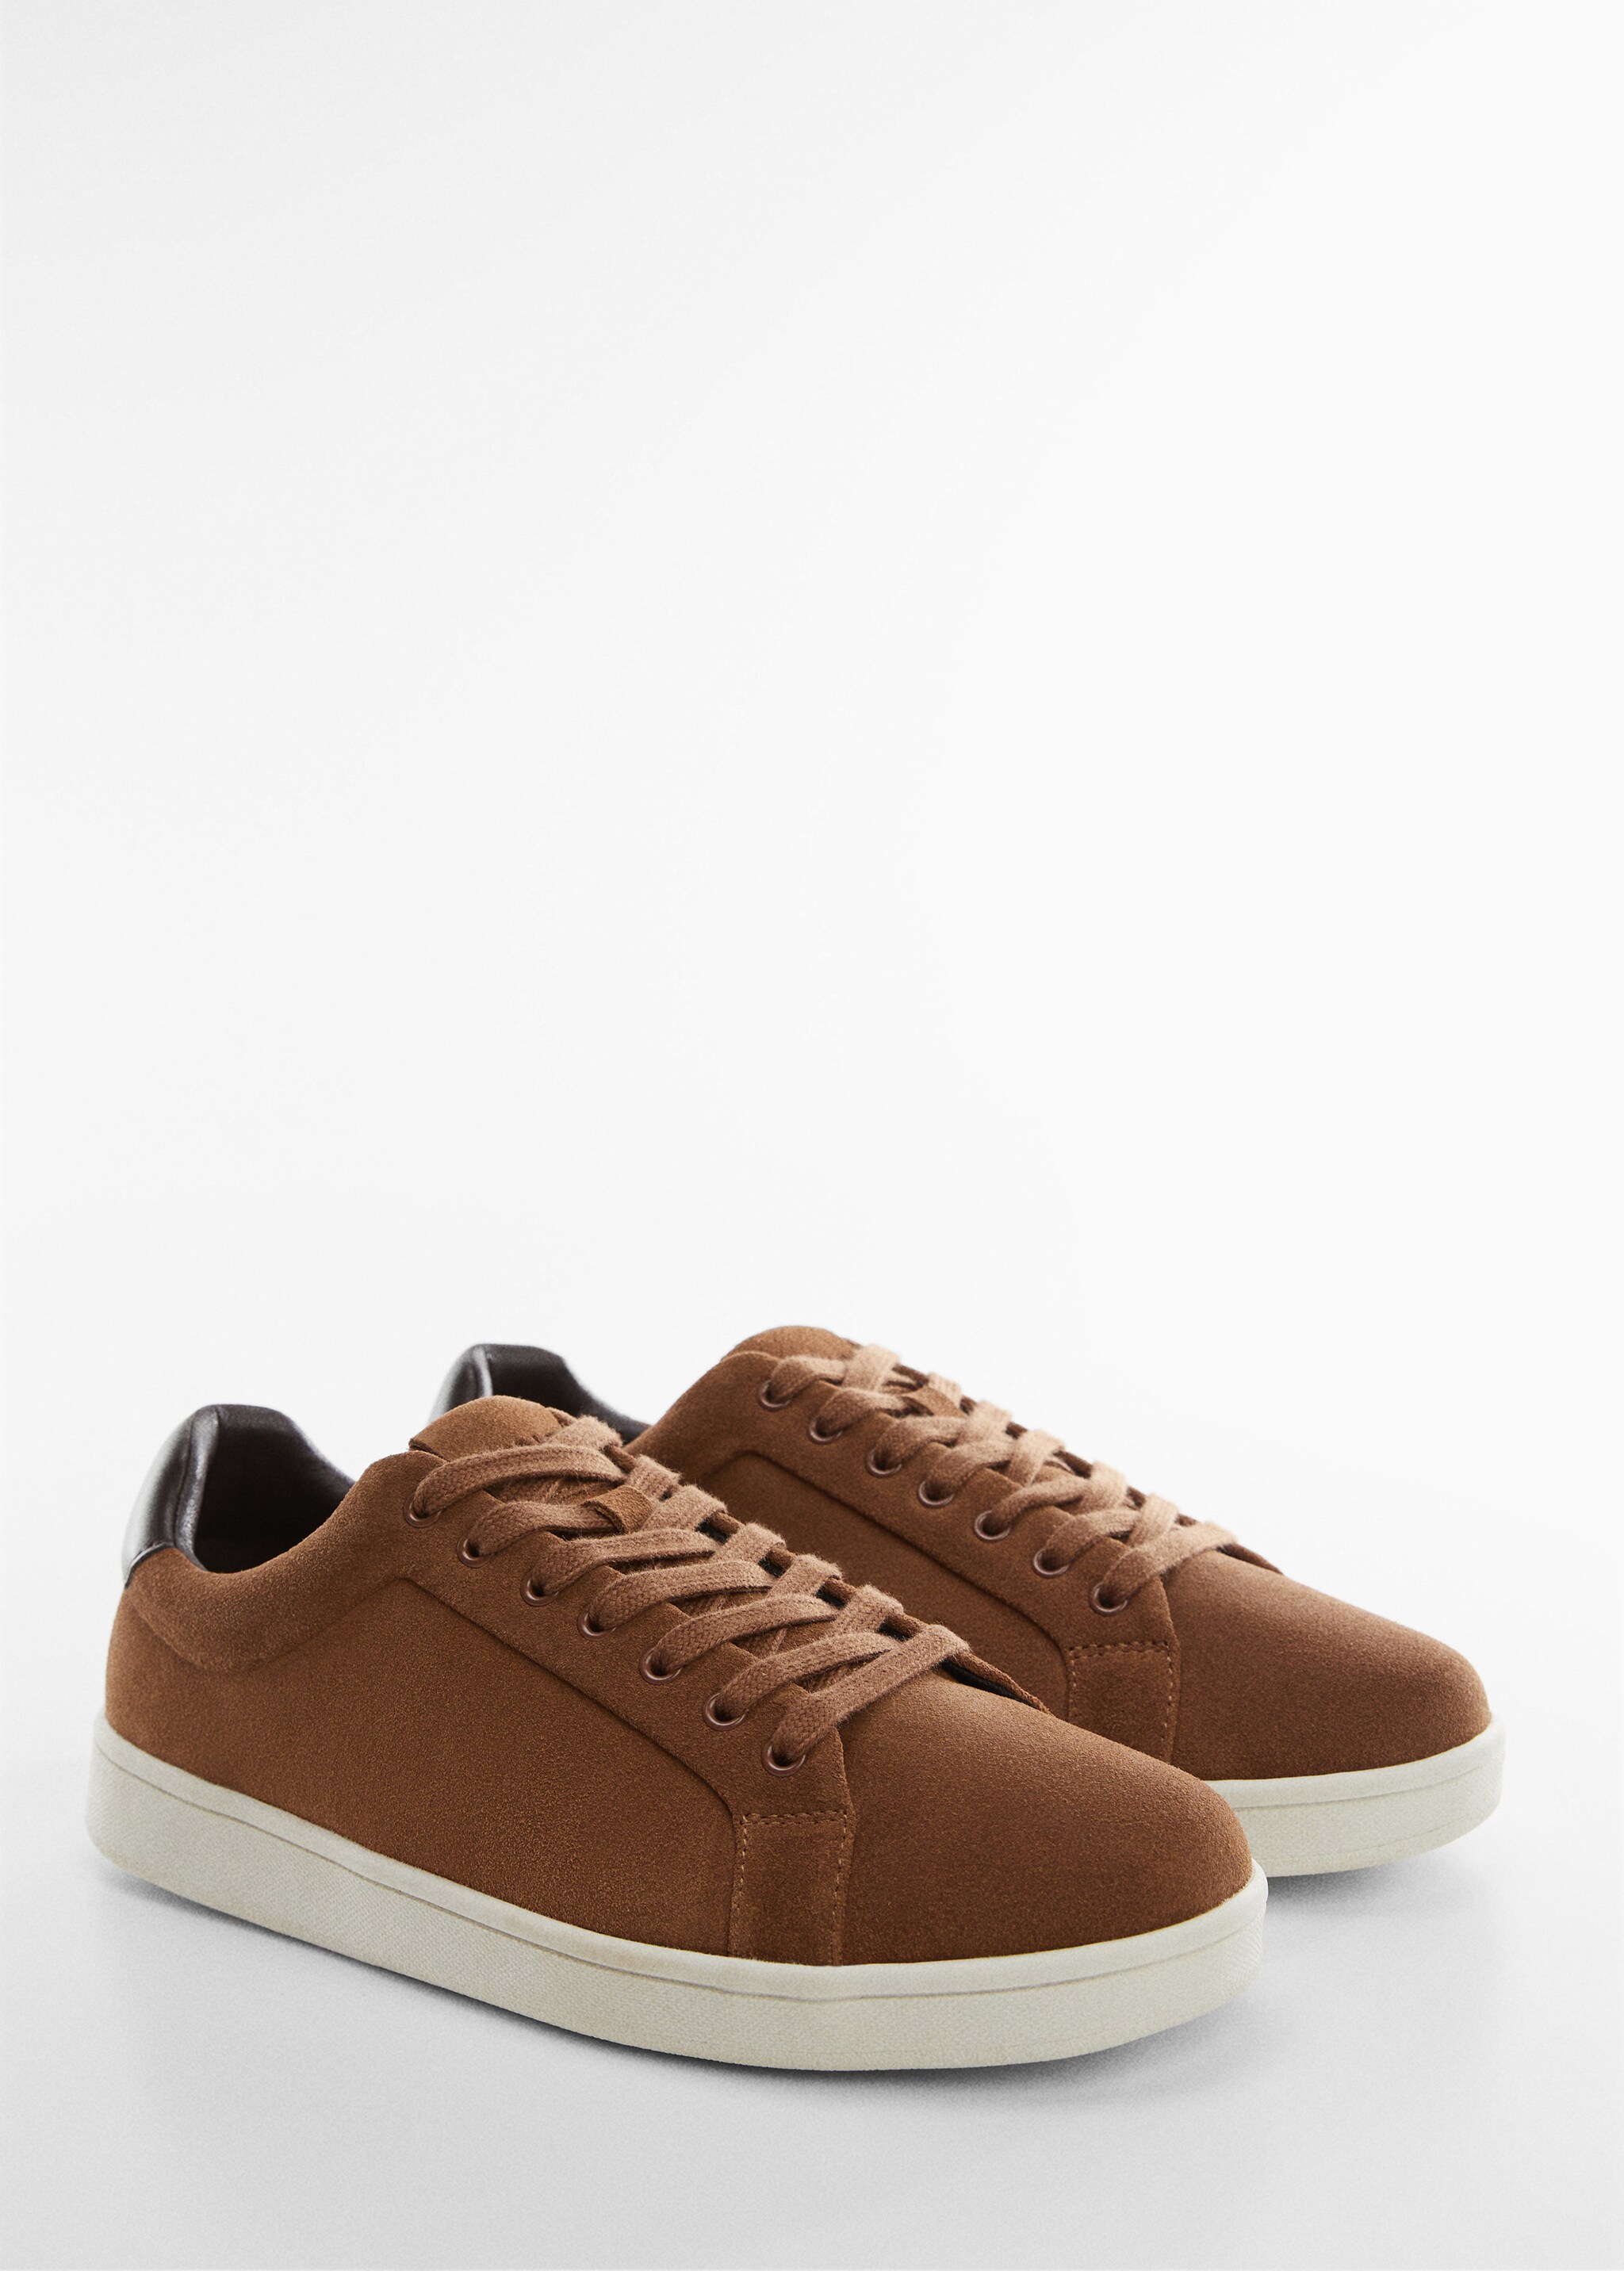 Lace-up leather sneakers - Medium plane